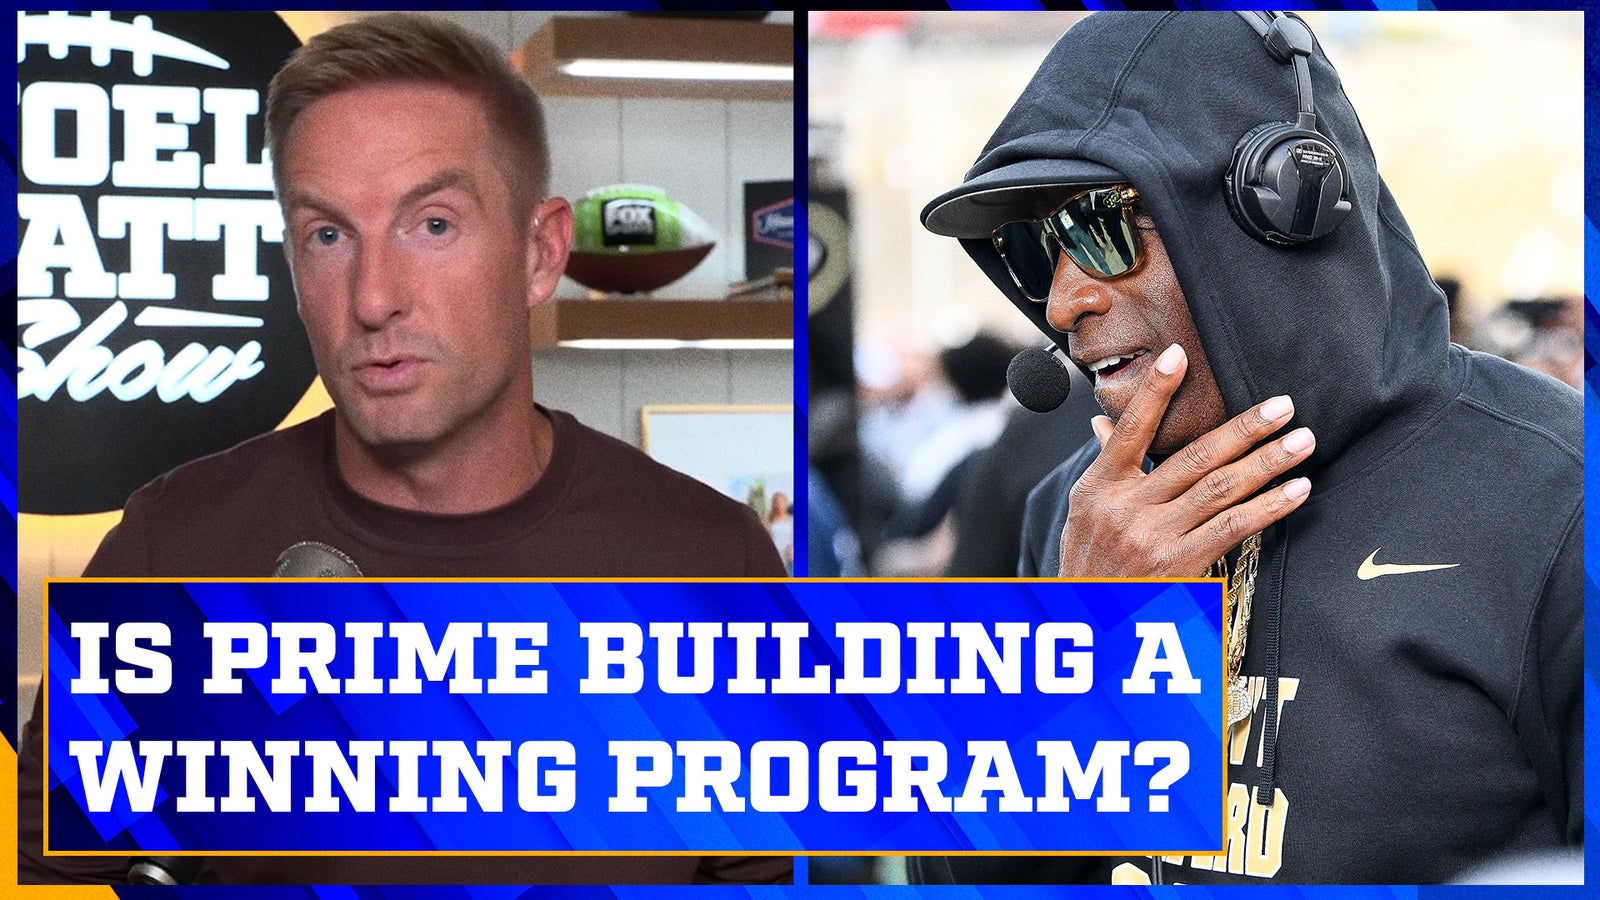 Did Coach Prime prove that he is building a winning program?